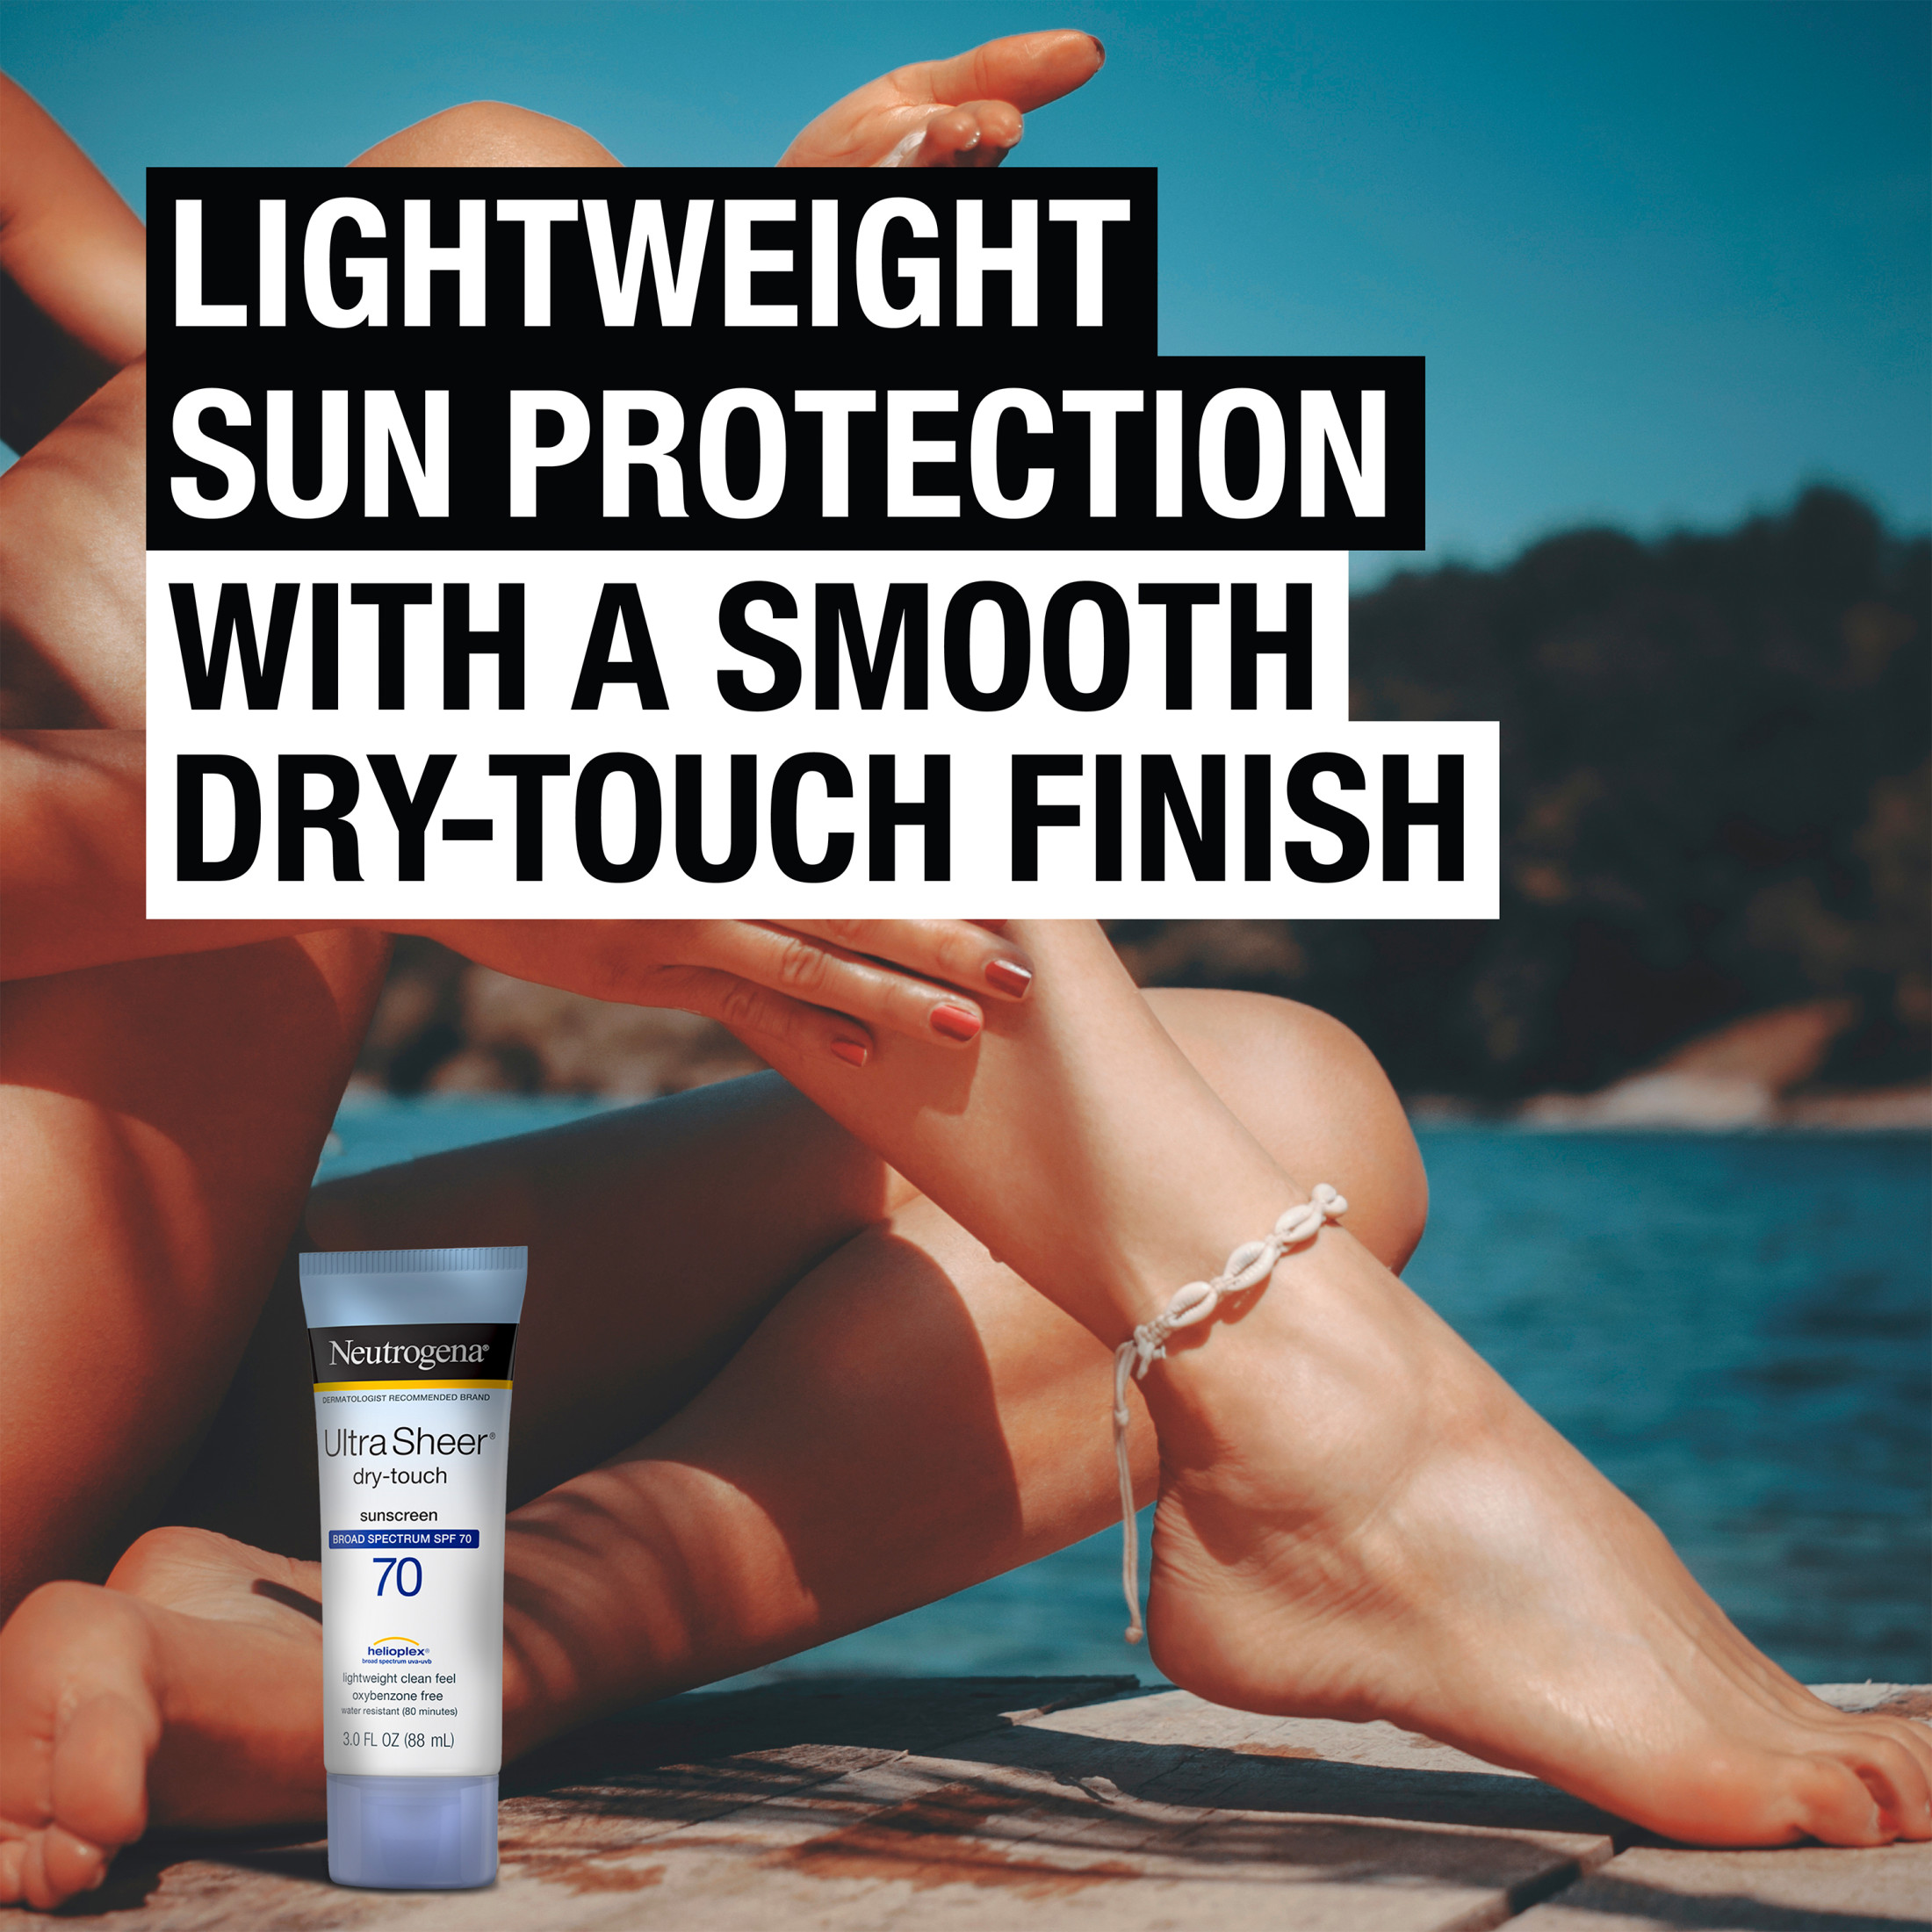 Neutrogena Ultra Sheer Dry-Touch Sunscreen Lotion, SPF 70 Face Sunblock, 3 fl oz - image 5 of 10